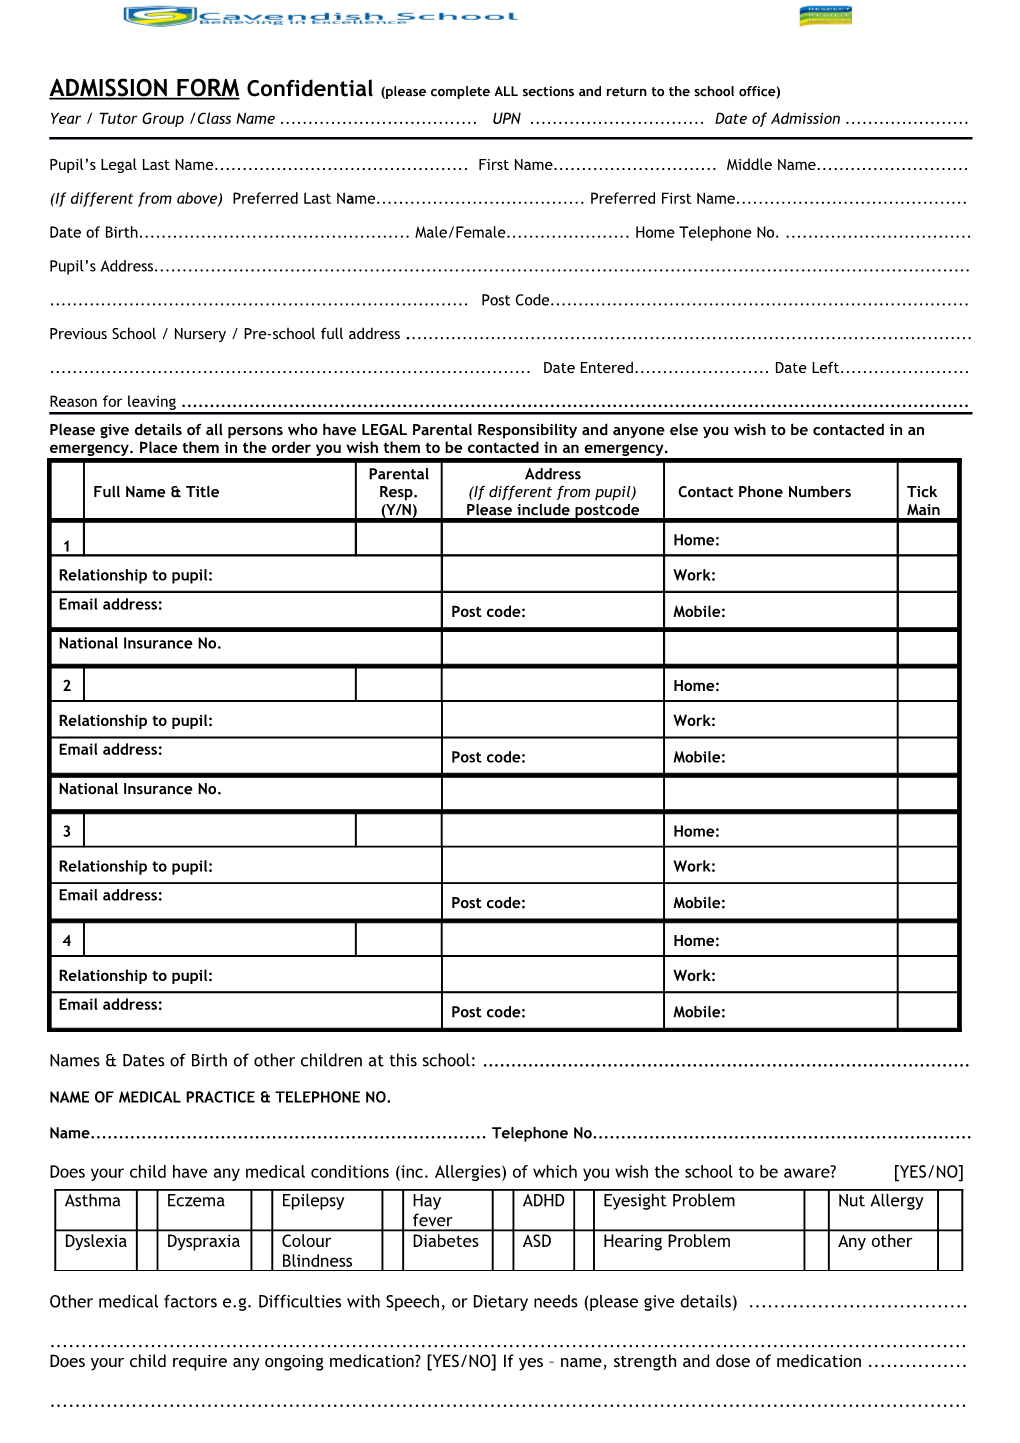 ADMISSION Formconfidential (Please Complete ALL Sections and Return to the School Office)